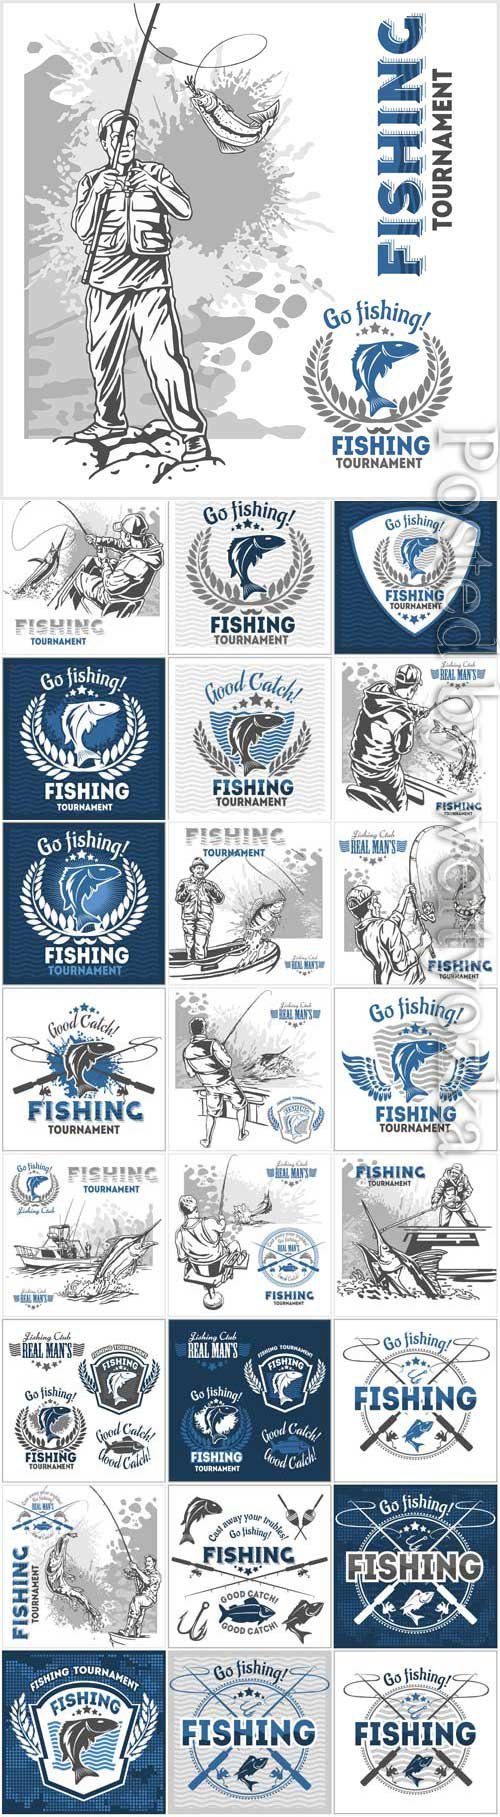 Fishing labels and logos in vector